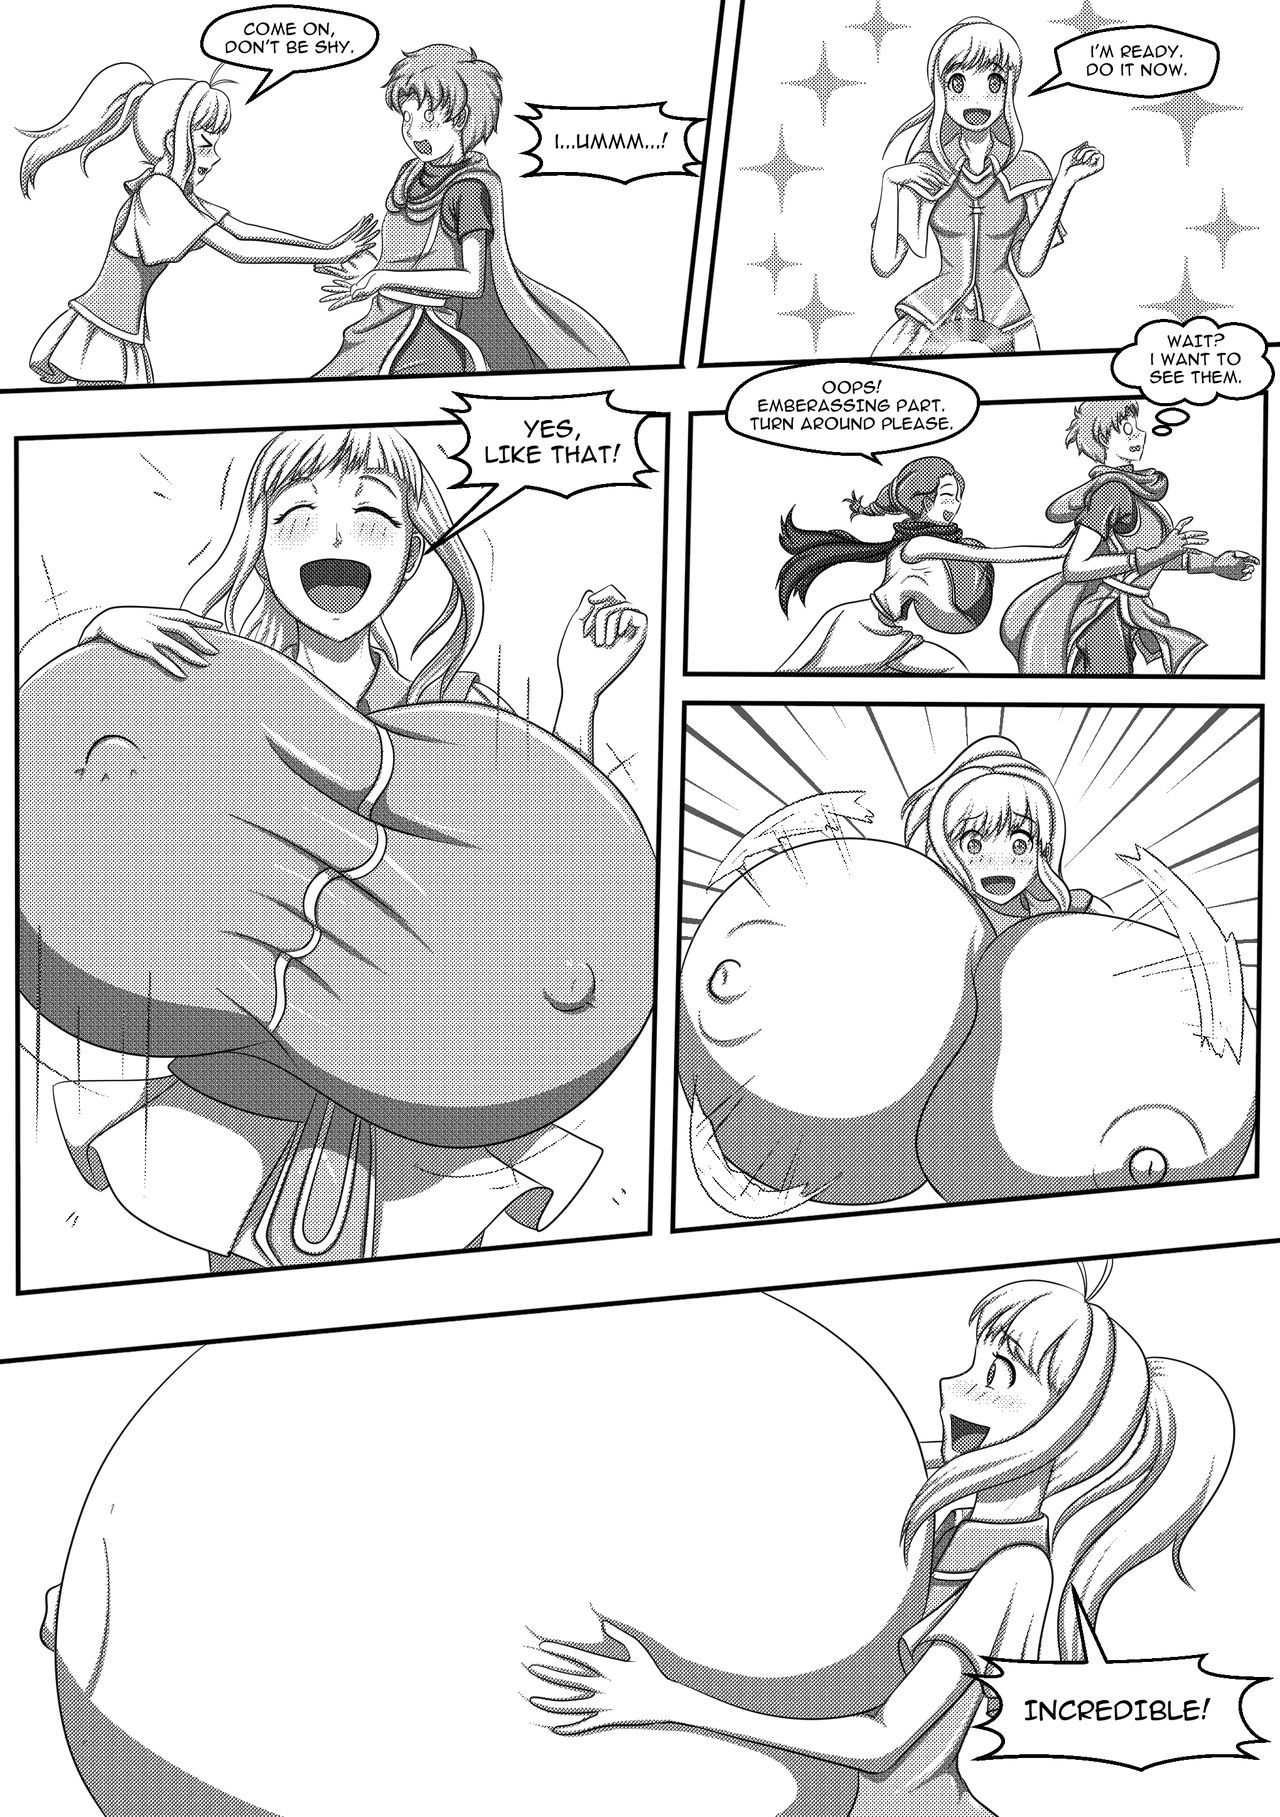 [EscapefromExpansion] Fire Emblem: The Binding Boobs [Ongoing] 3